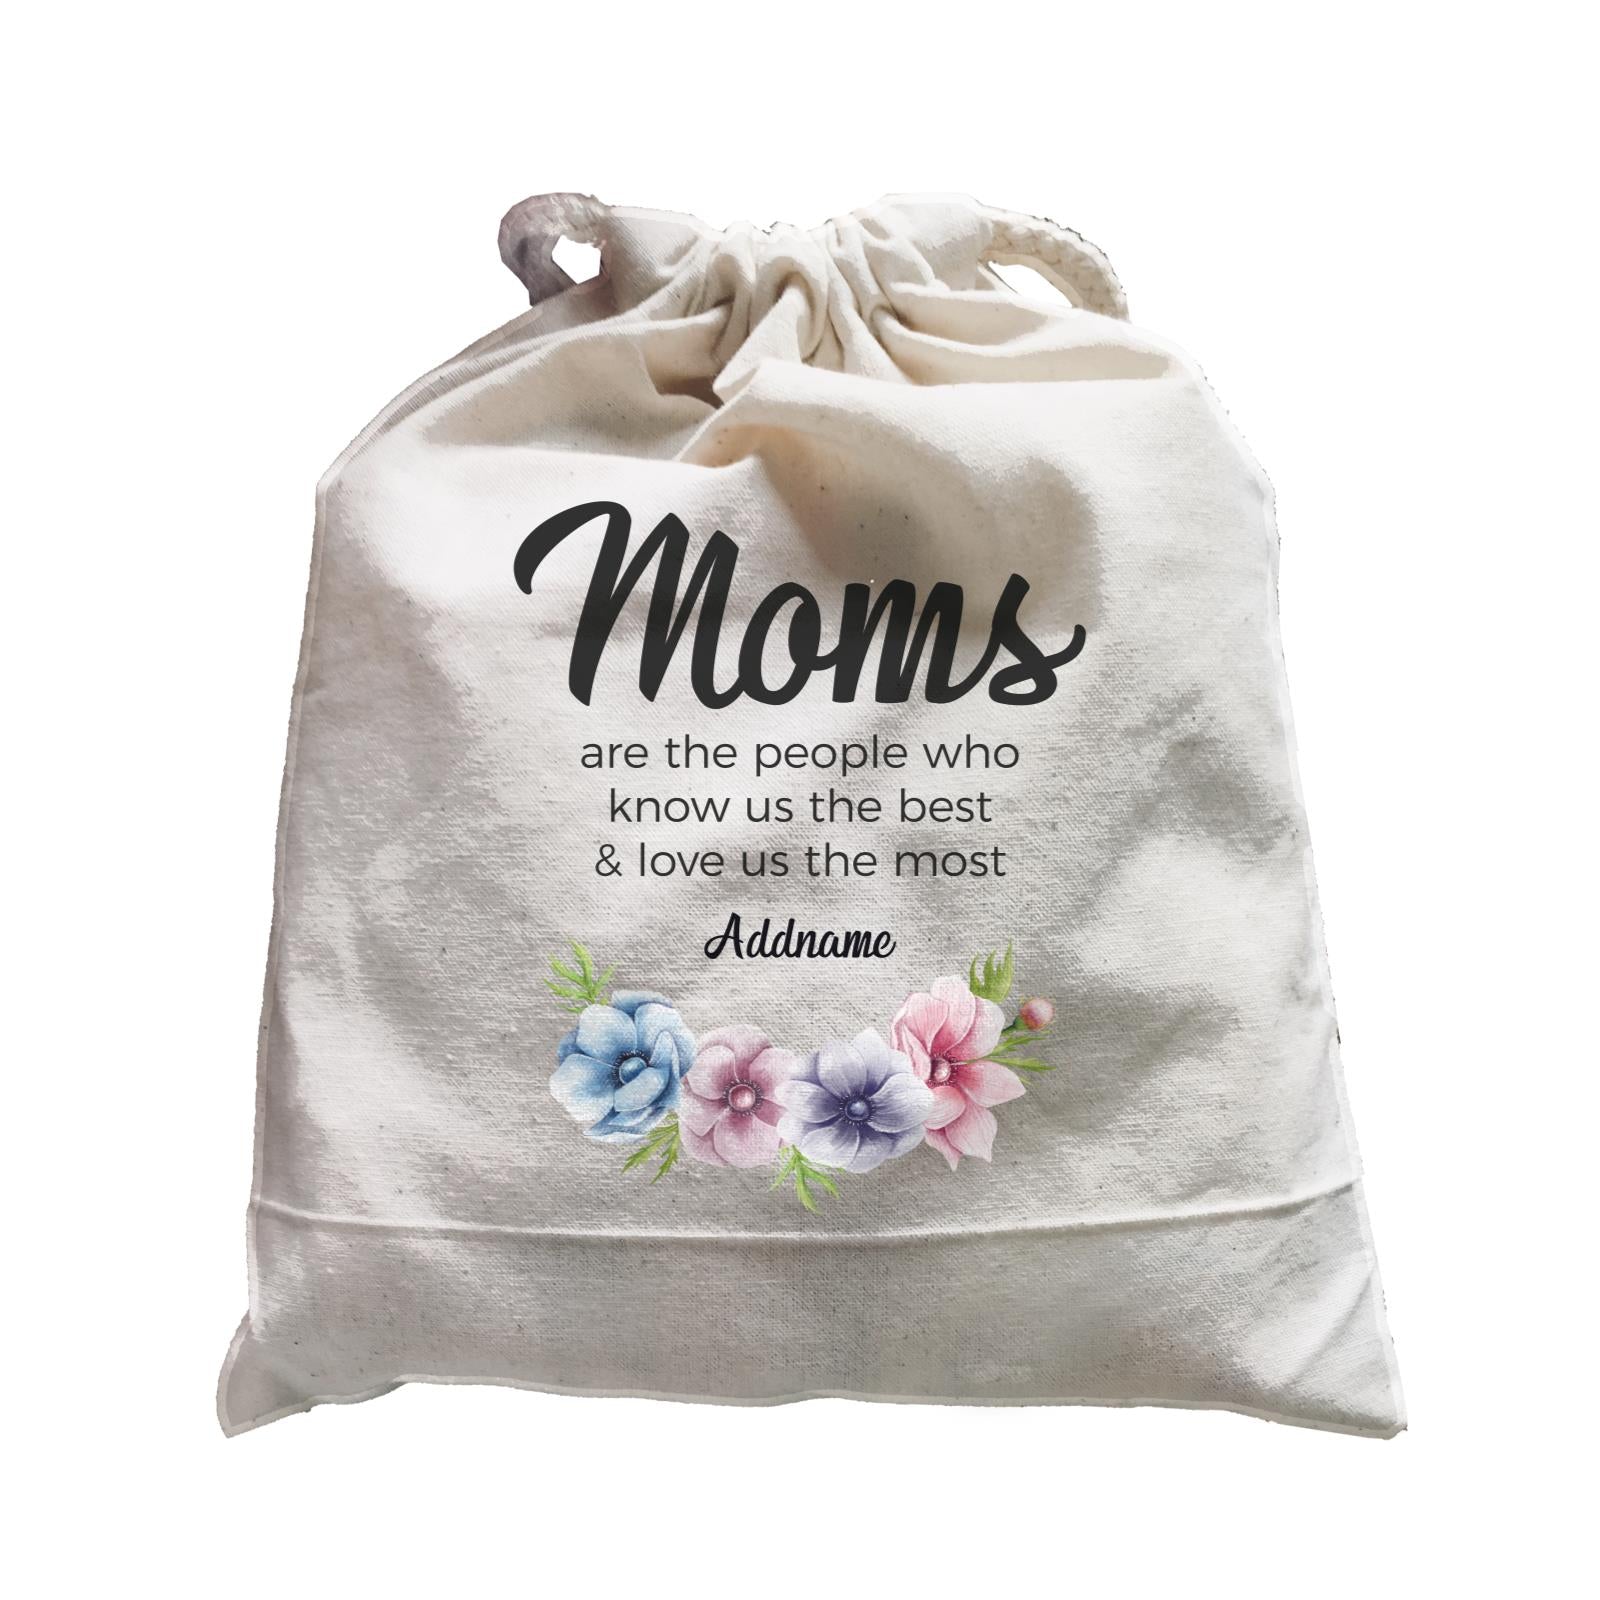 Sweet Mom Quotes 1 Moms Are The People Who Know Us The Best & Love Us The Most Addname Satchel